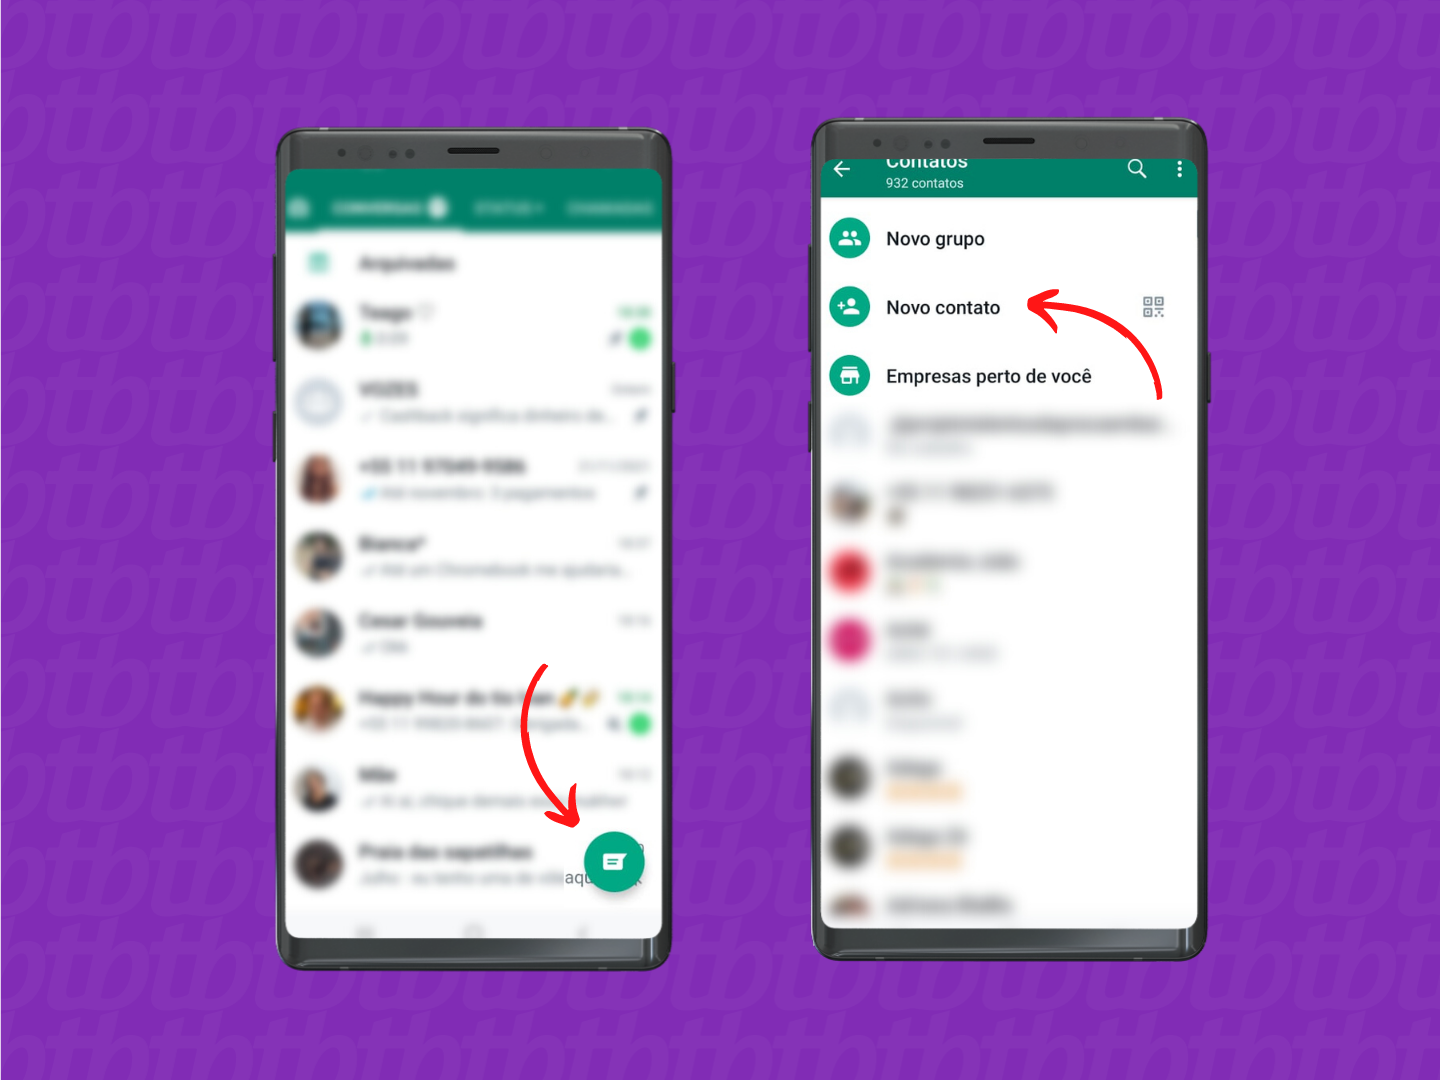 Path to add a contact on WhatsApp